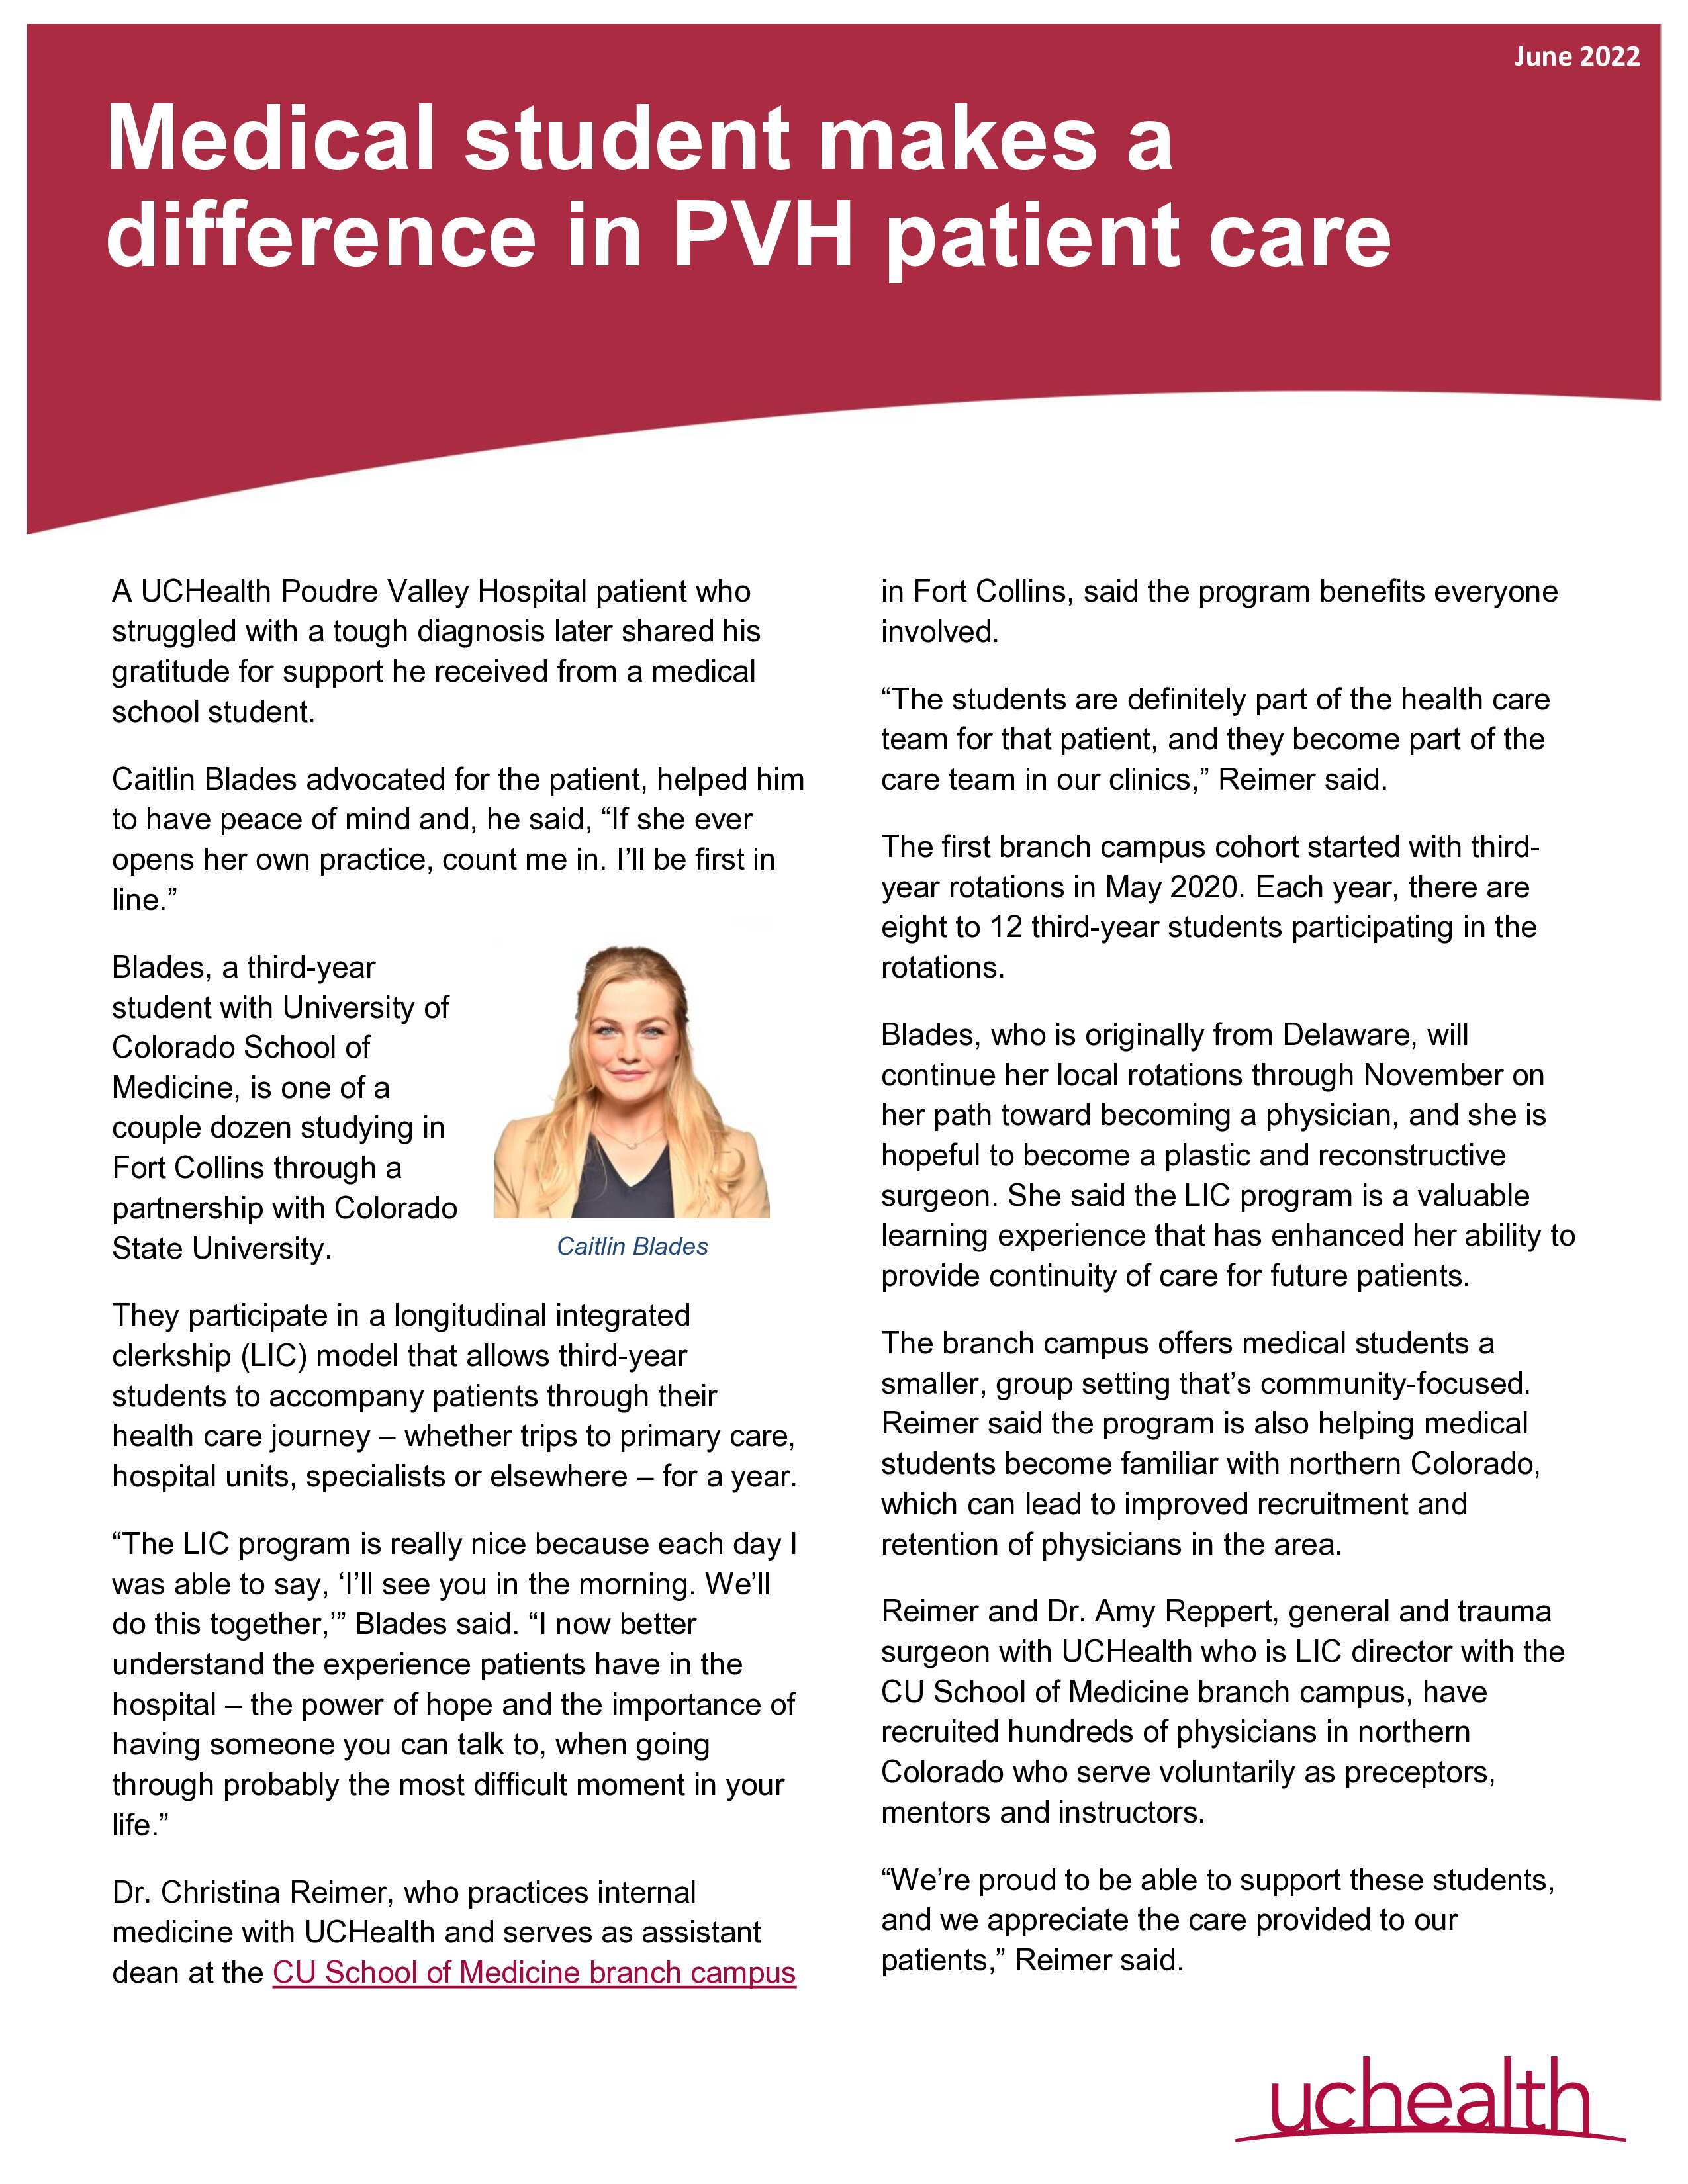 Medical student makes a difference in PVH patient care